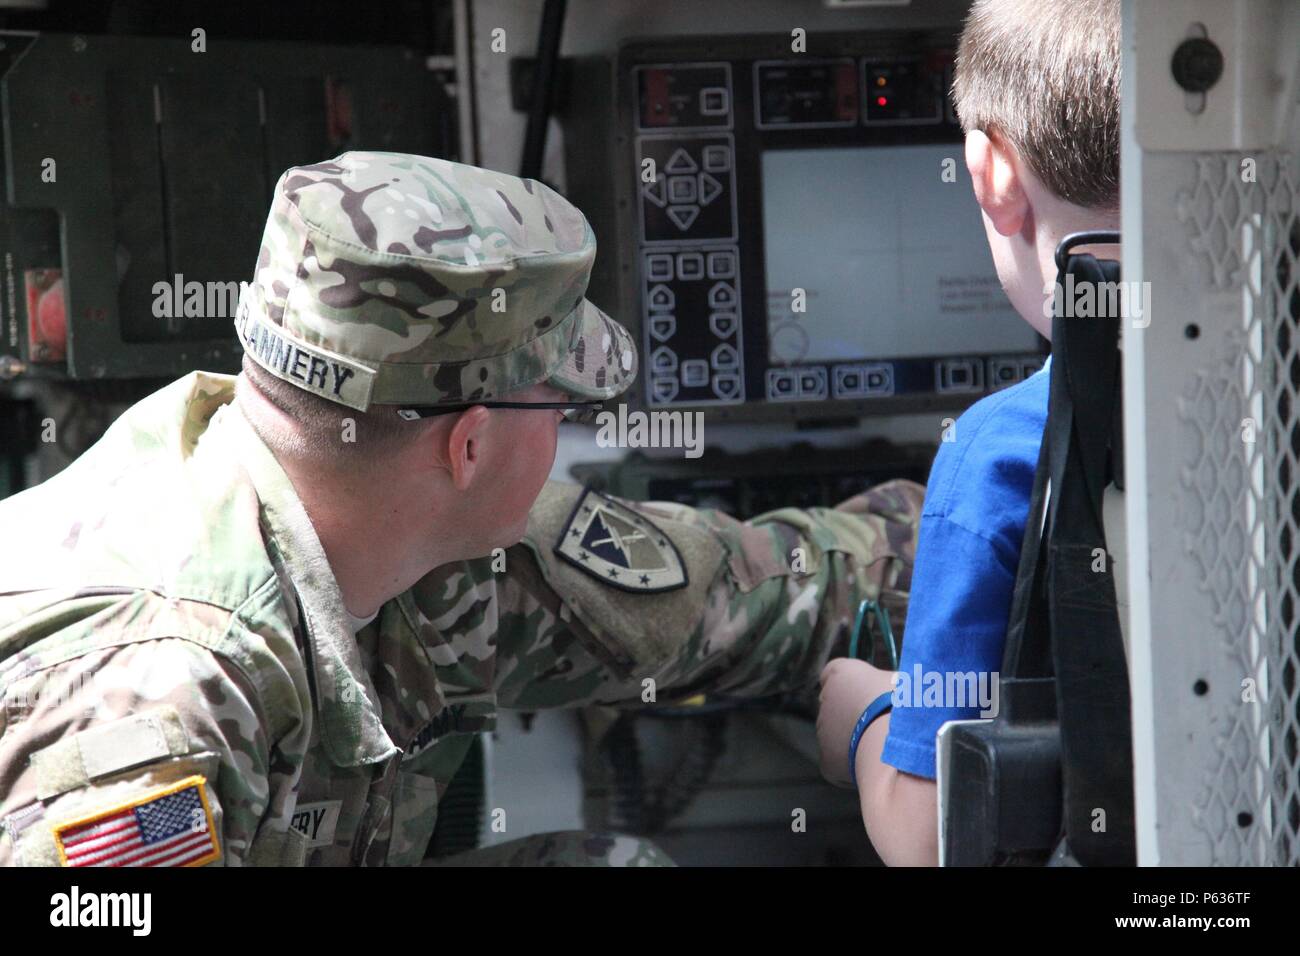 U.S. Army Pfc. John Flannery, Delta Company 1-16, 316th Cavalry Bridgade, demonstrates control functions of the Stryker infantry carrier vehicle during the Thunder in the Valley Air Show at Columbus Airport, Columbus, Ga., April 16, 2016. The Thunder in the Valley Air Show began in 1997 and has grown to become one the largest outdoor family events in the Chattahoochee Valley. The air show brings in top performers from across the United States. (U.S. Army photo by Spc. Zakia Gray /Released) Stock Photo